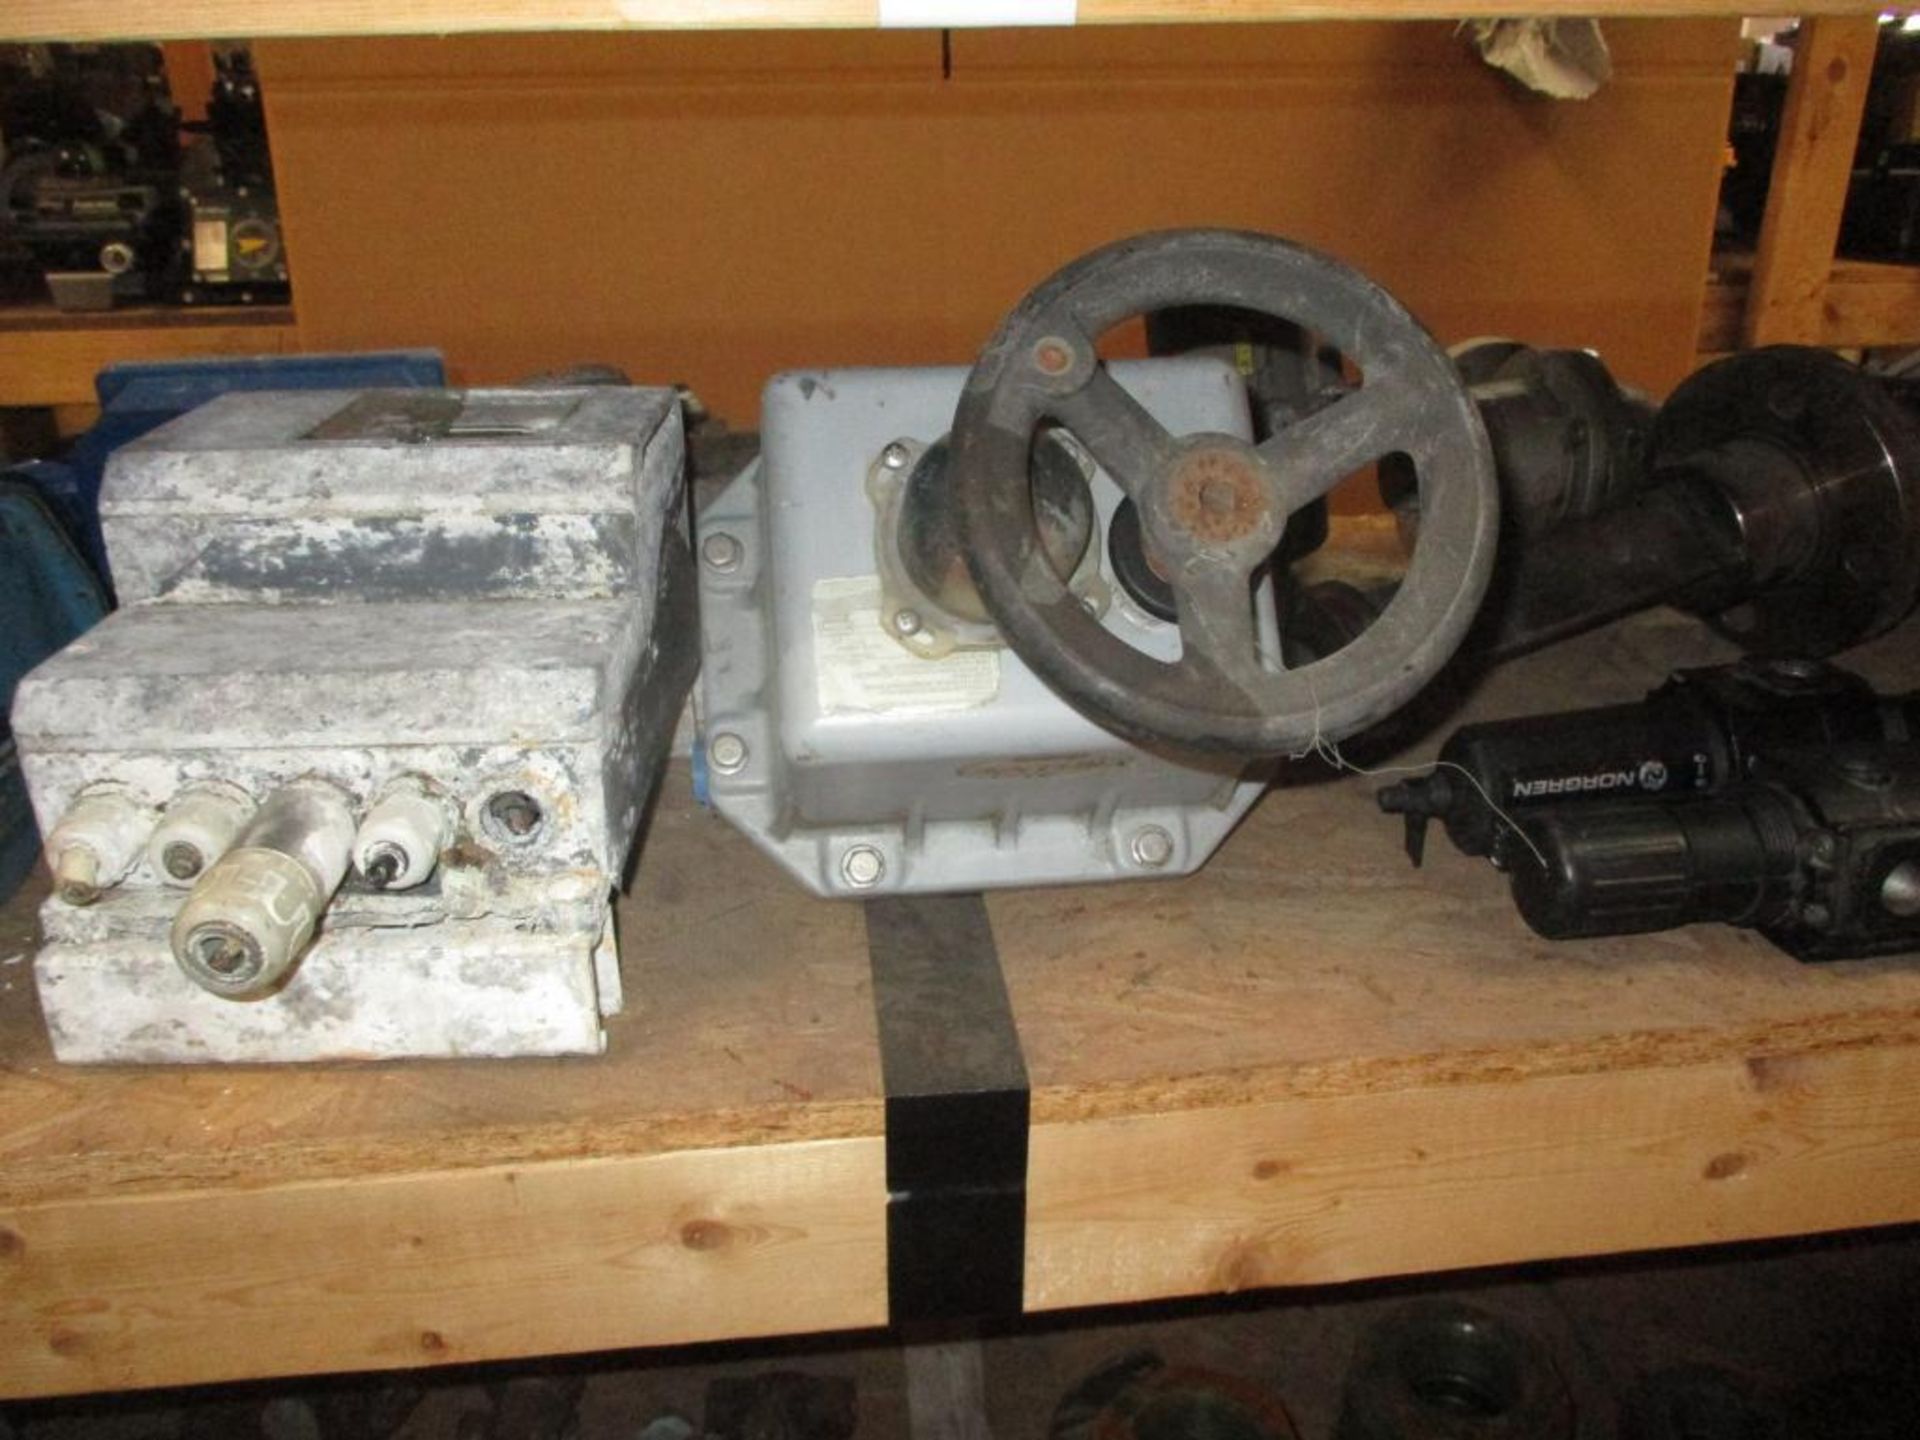 Contents of Shelf D-9-4 & D-10-4; Baily Instrument, Foxboro 876PH Transmitter, Kates Valve, Flowserv - Image 5 of 6